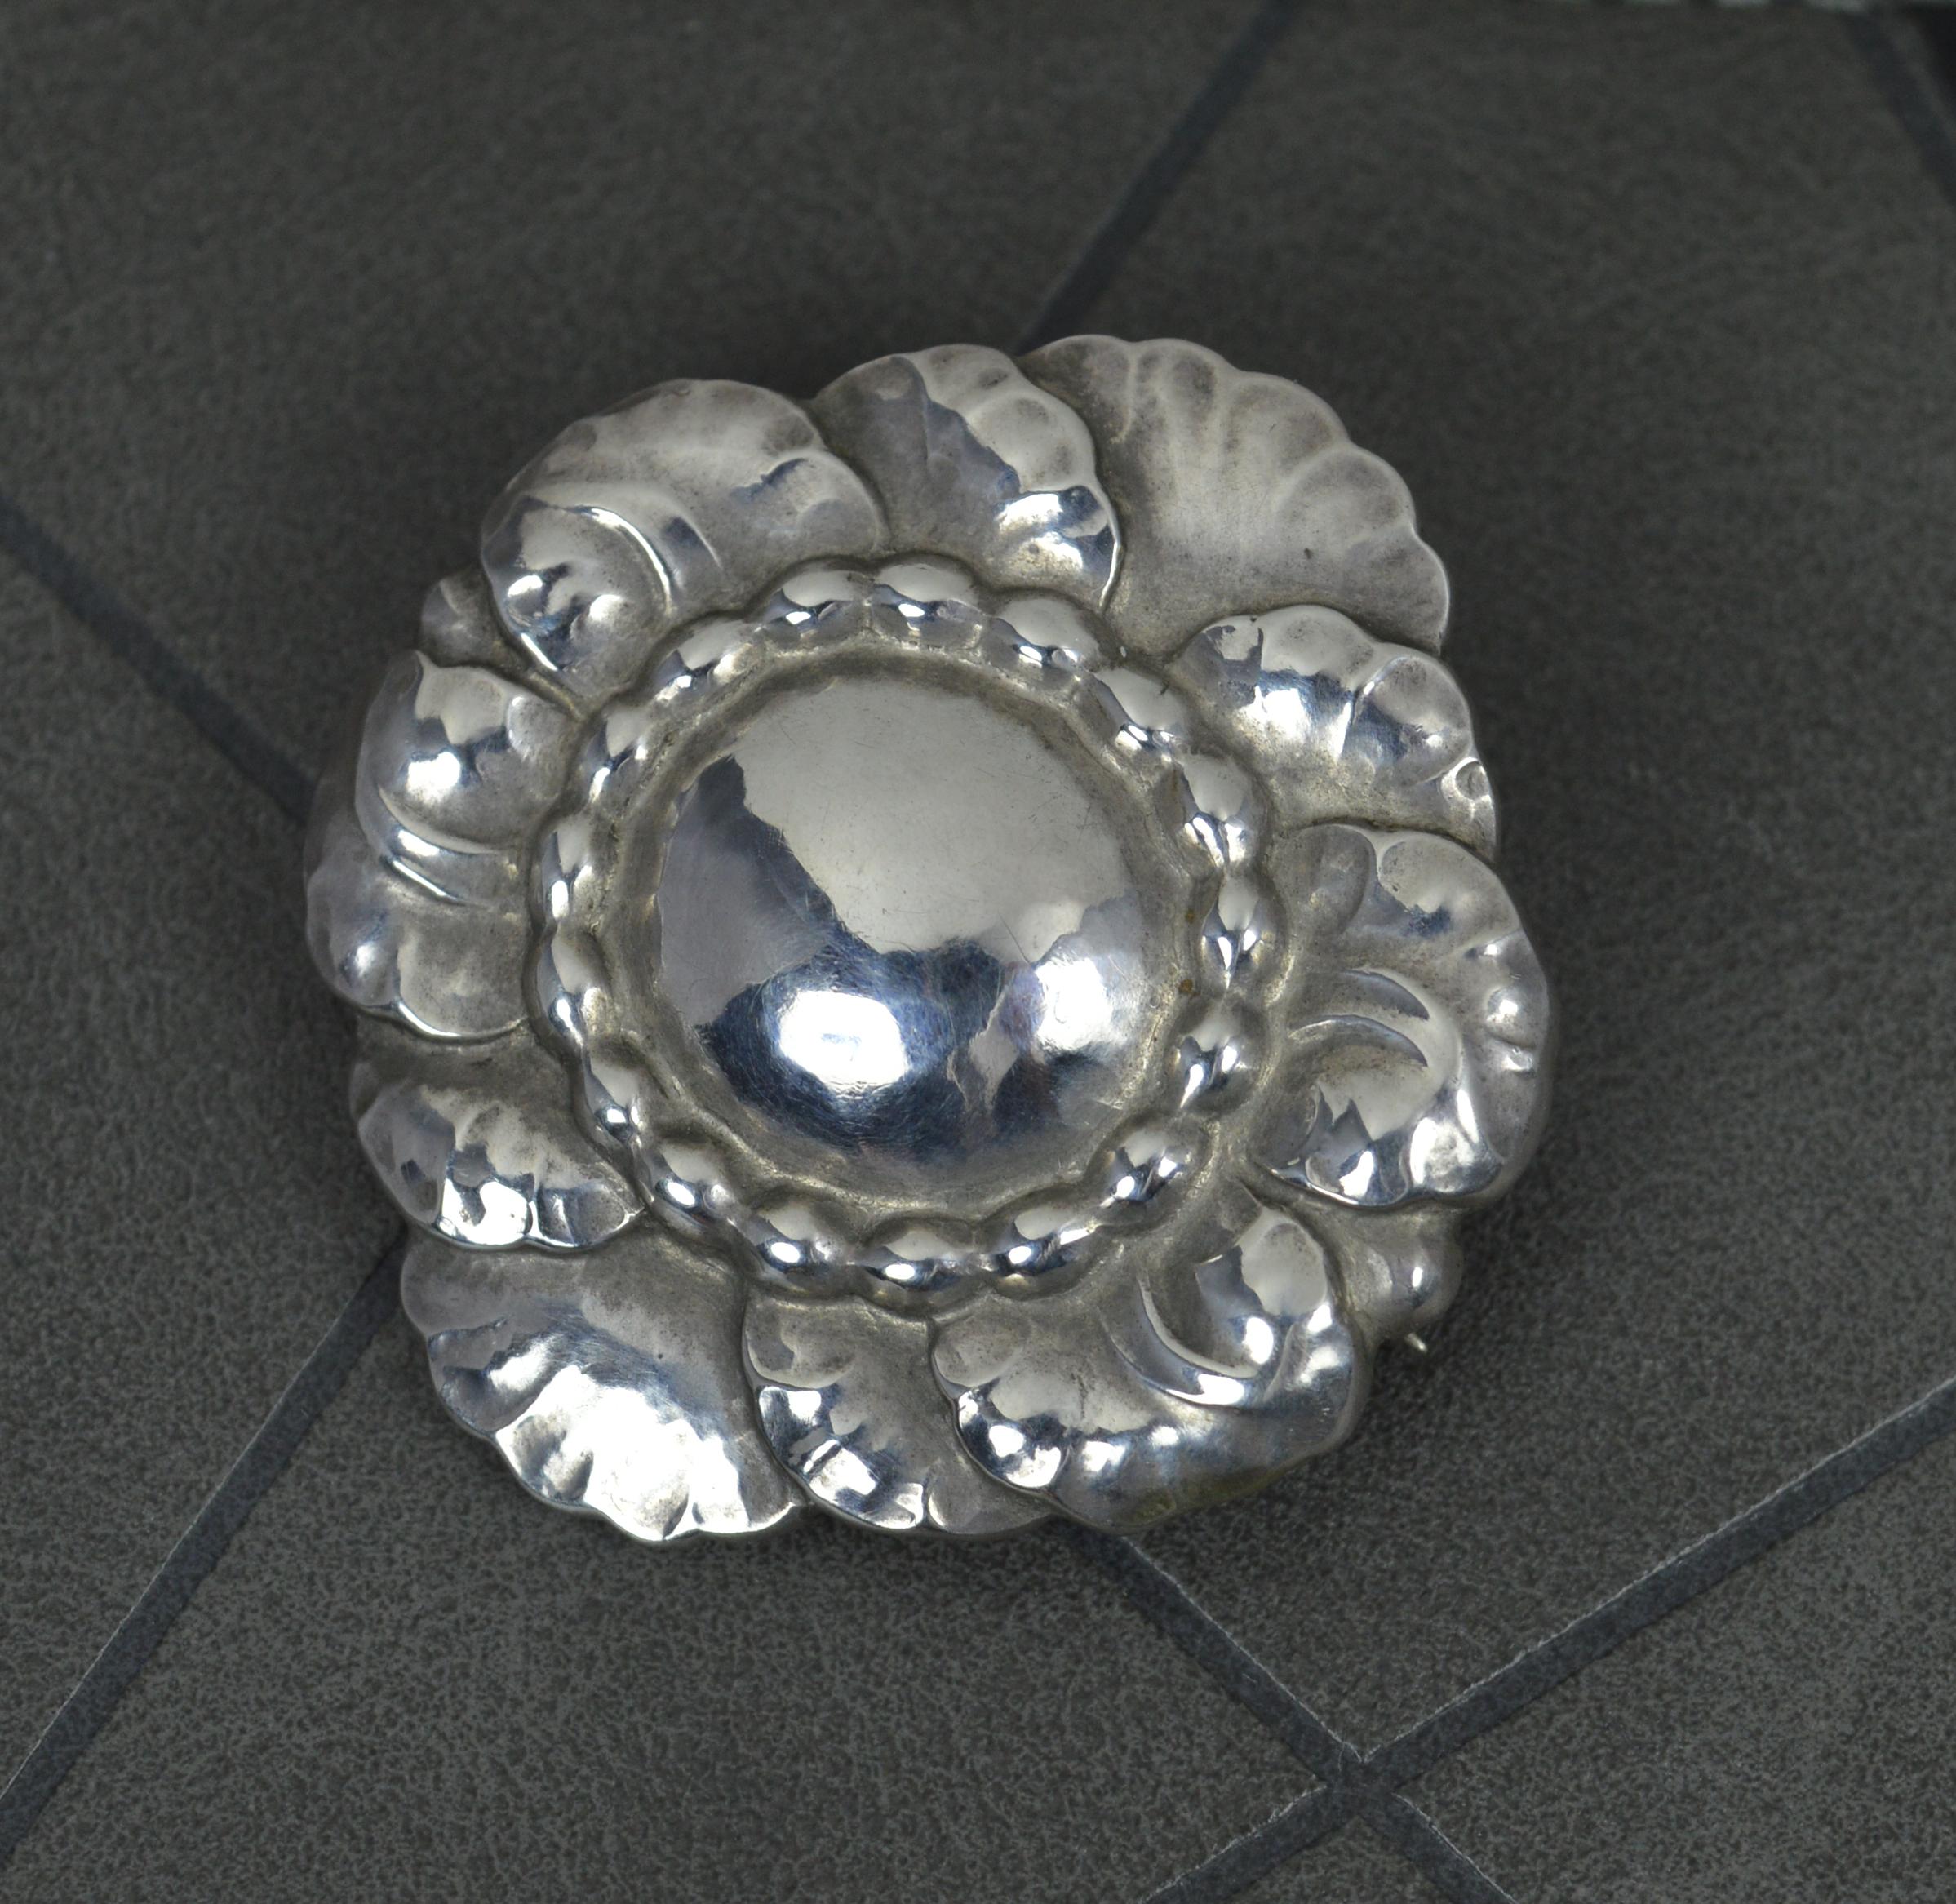 A fine vintage Georg Jensen brooch.
Sterling silver example.
Flower shape. Model # 174.
Hallmarks ; to reverse
Weight ; 9.1 grams
Size ; 37mm x 39mm approx
Condition ; Very good. Clean example. Crisp design. Working pin. Please view photographs.